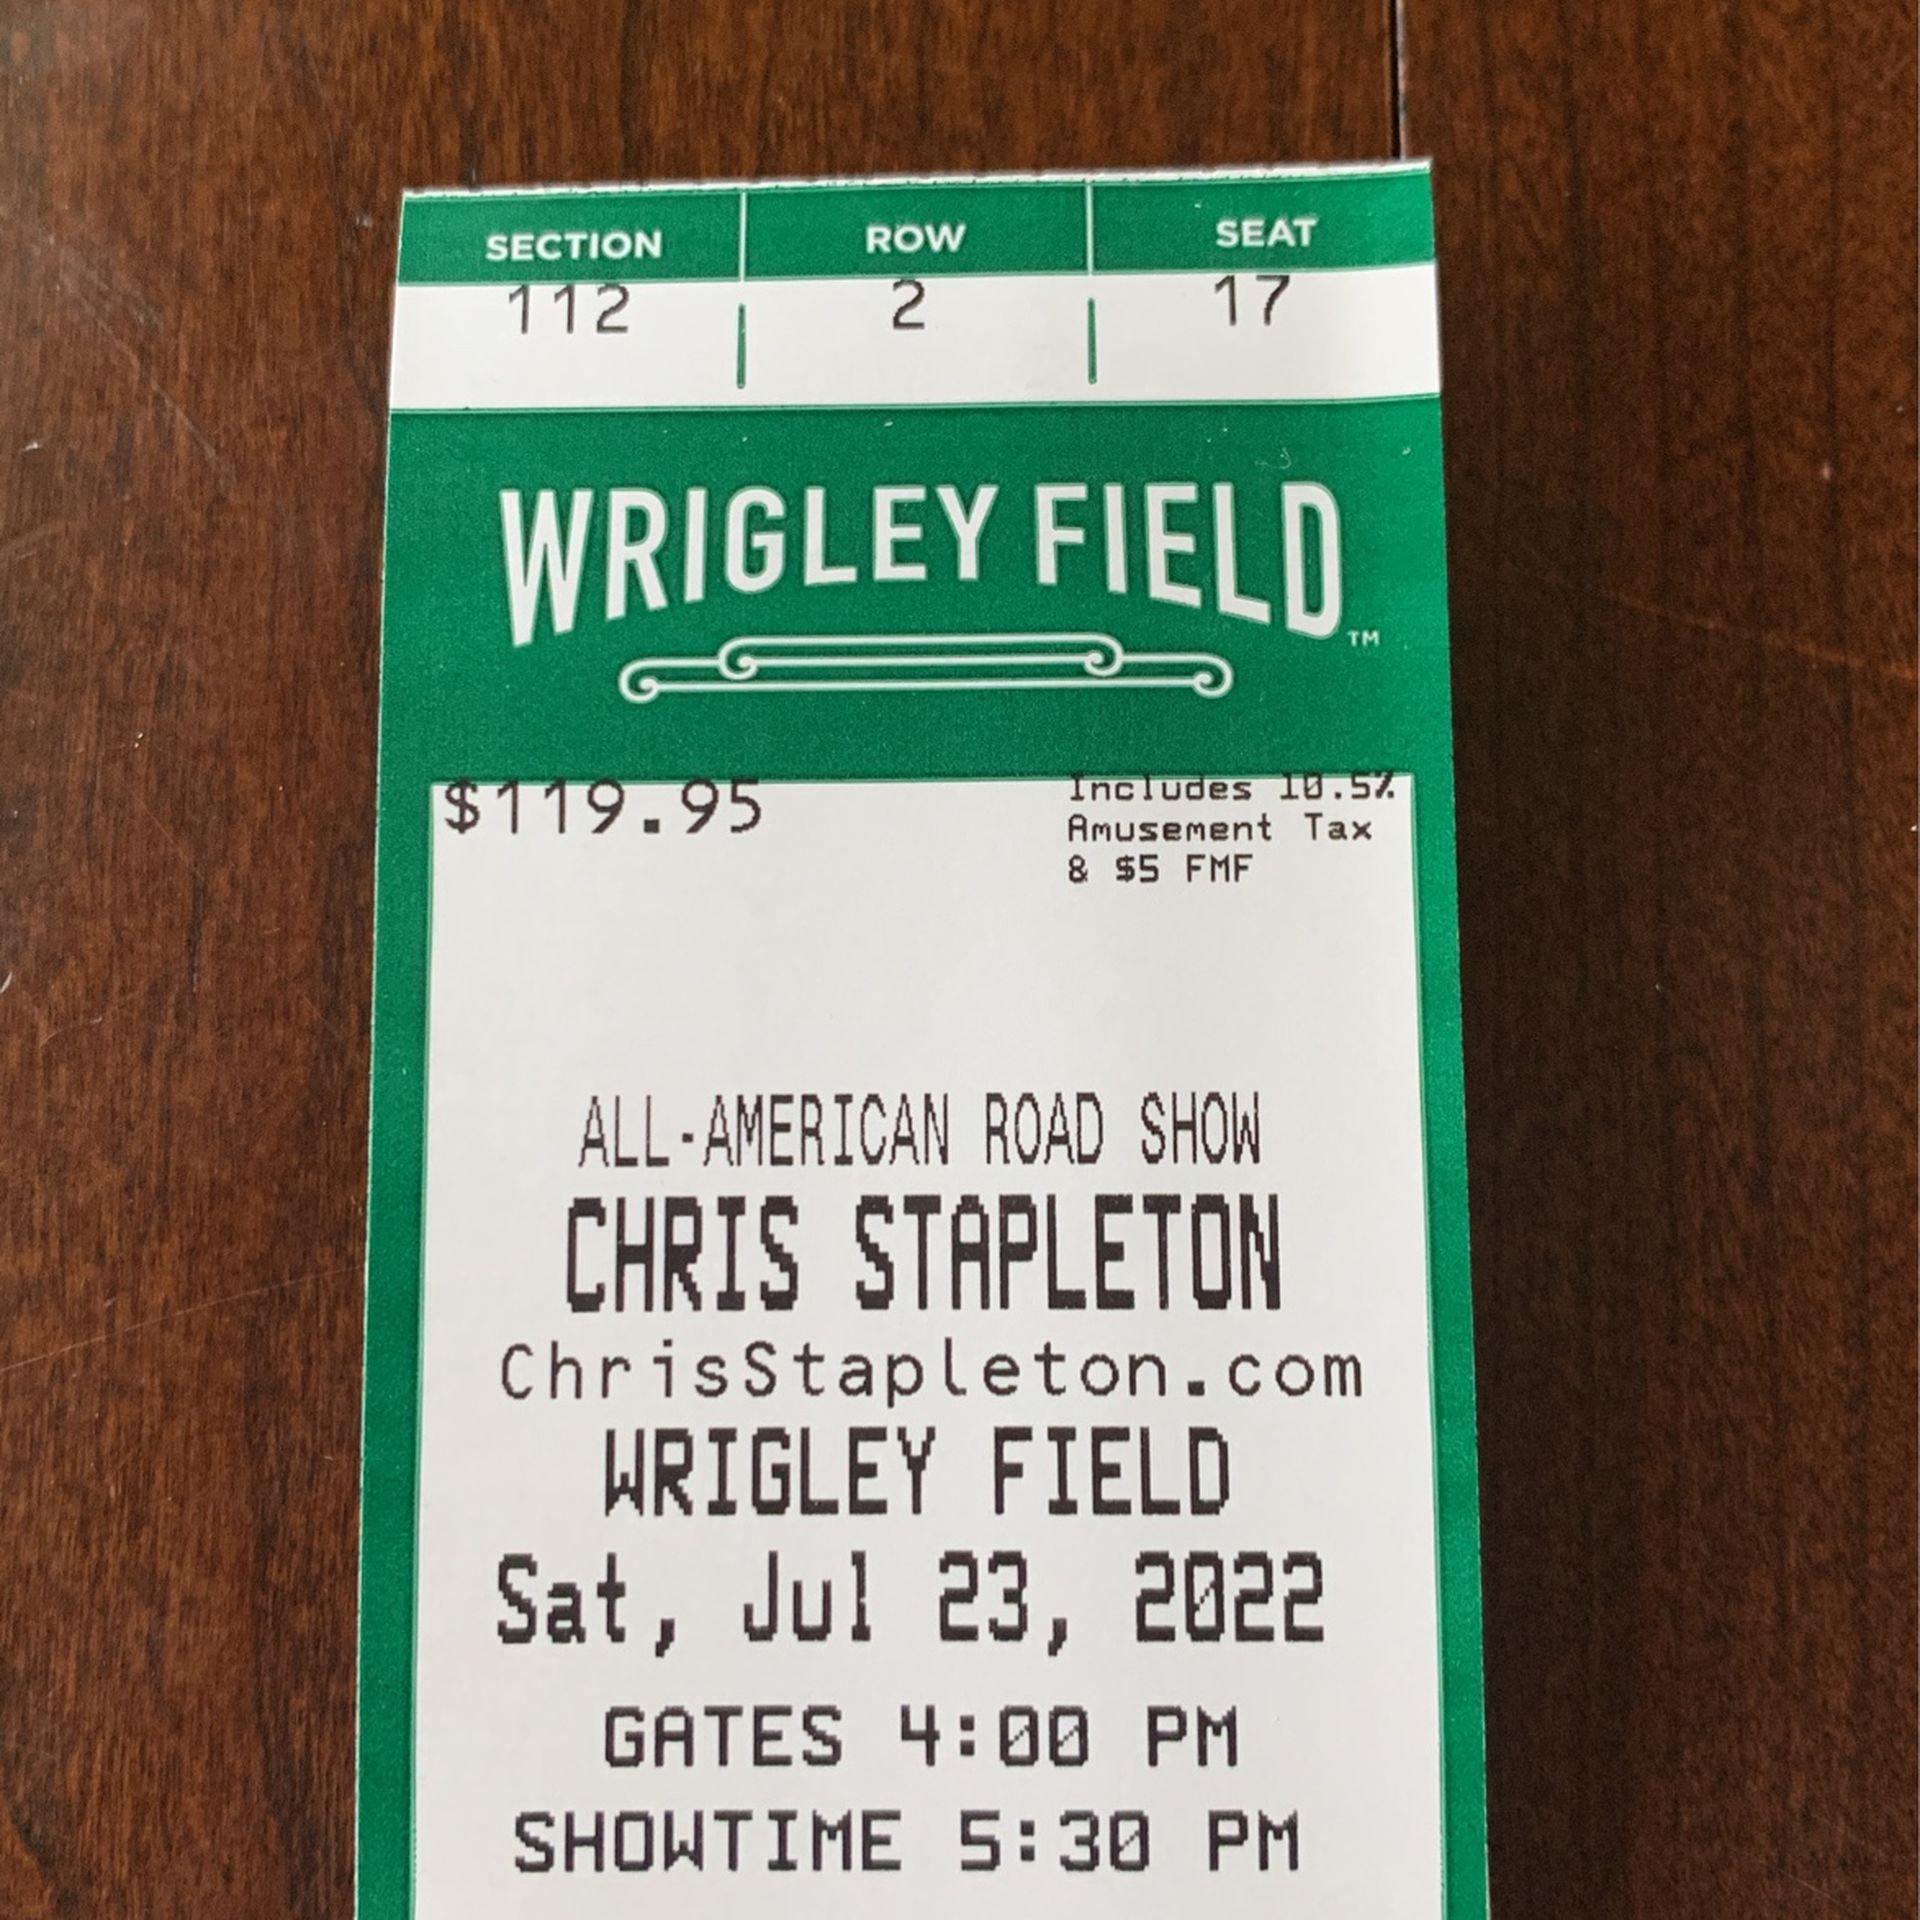 Chris Stapleton 2 Tickets All - American Road Show @ Wrigley Field July 23, 2022